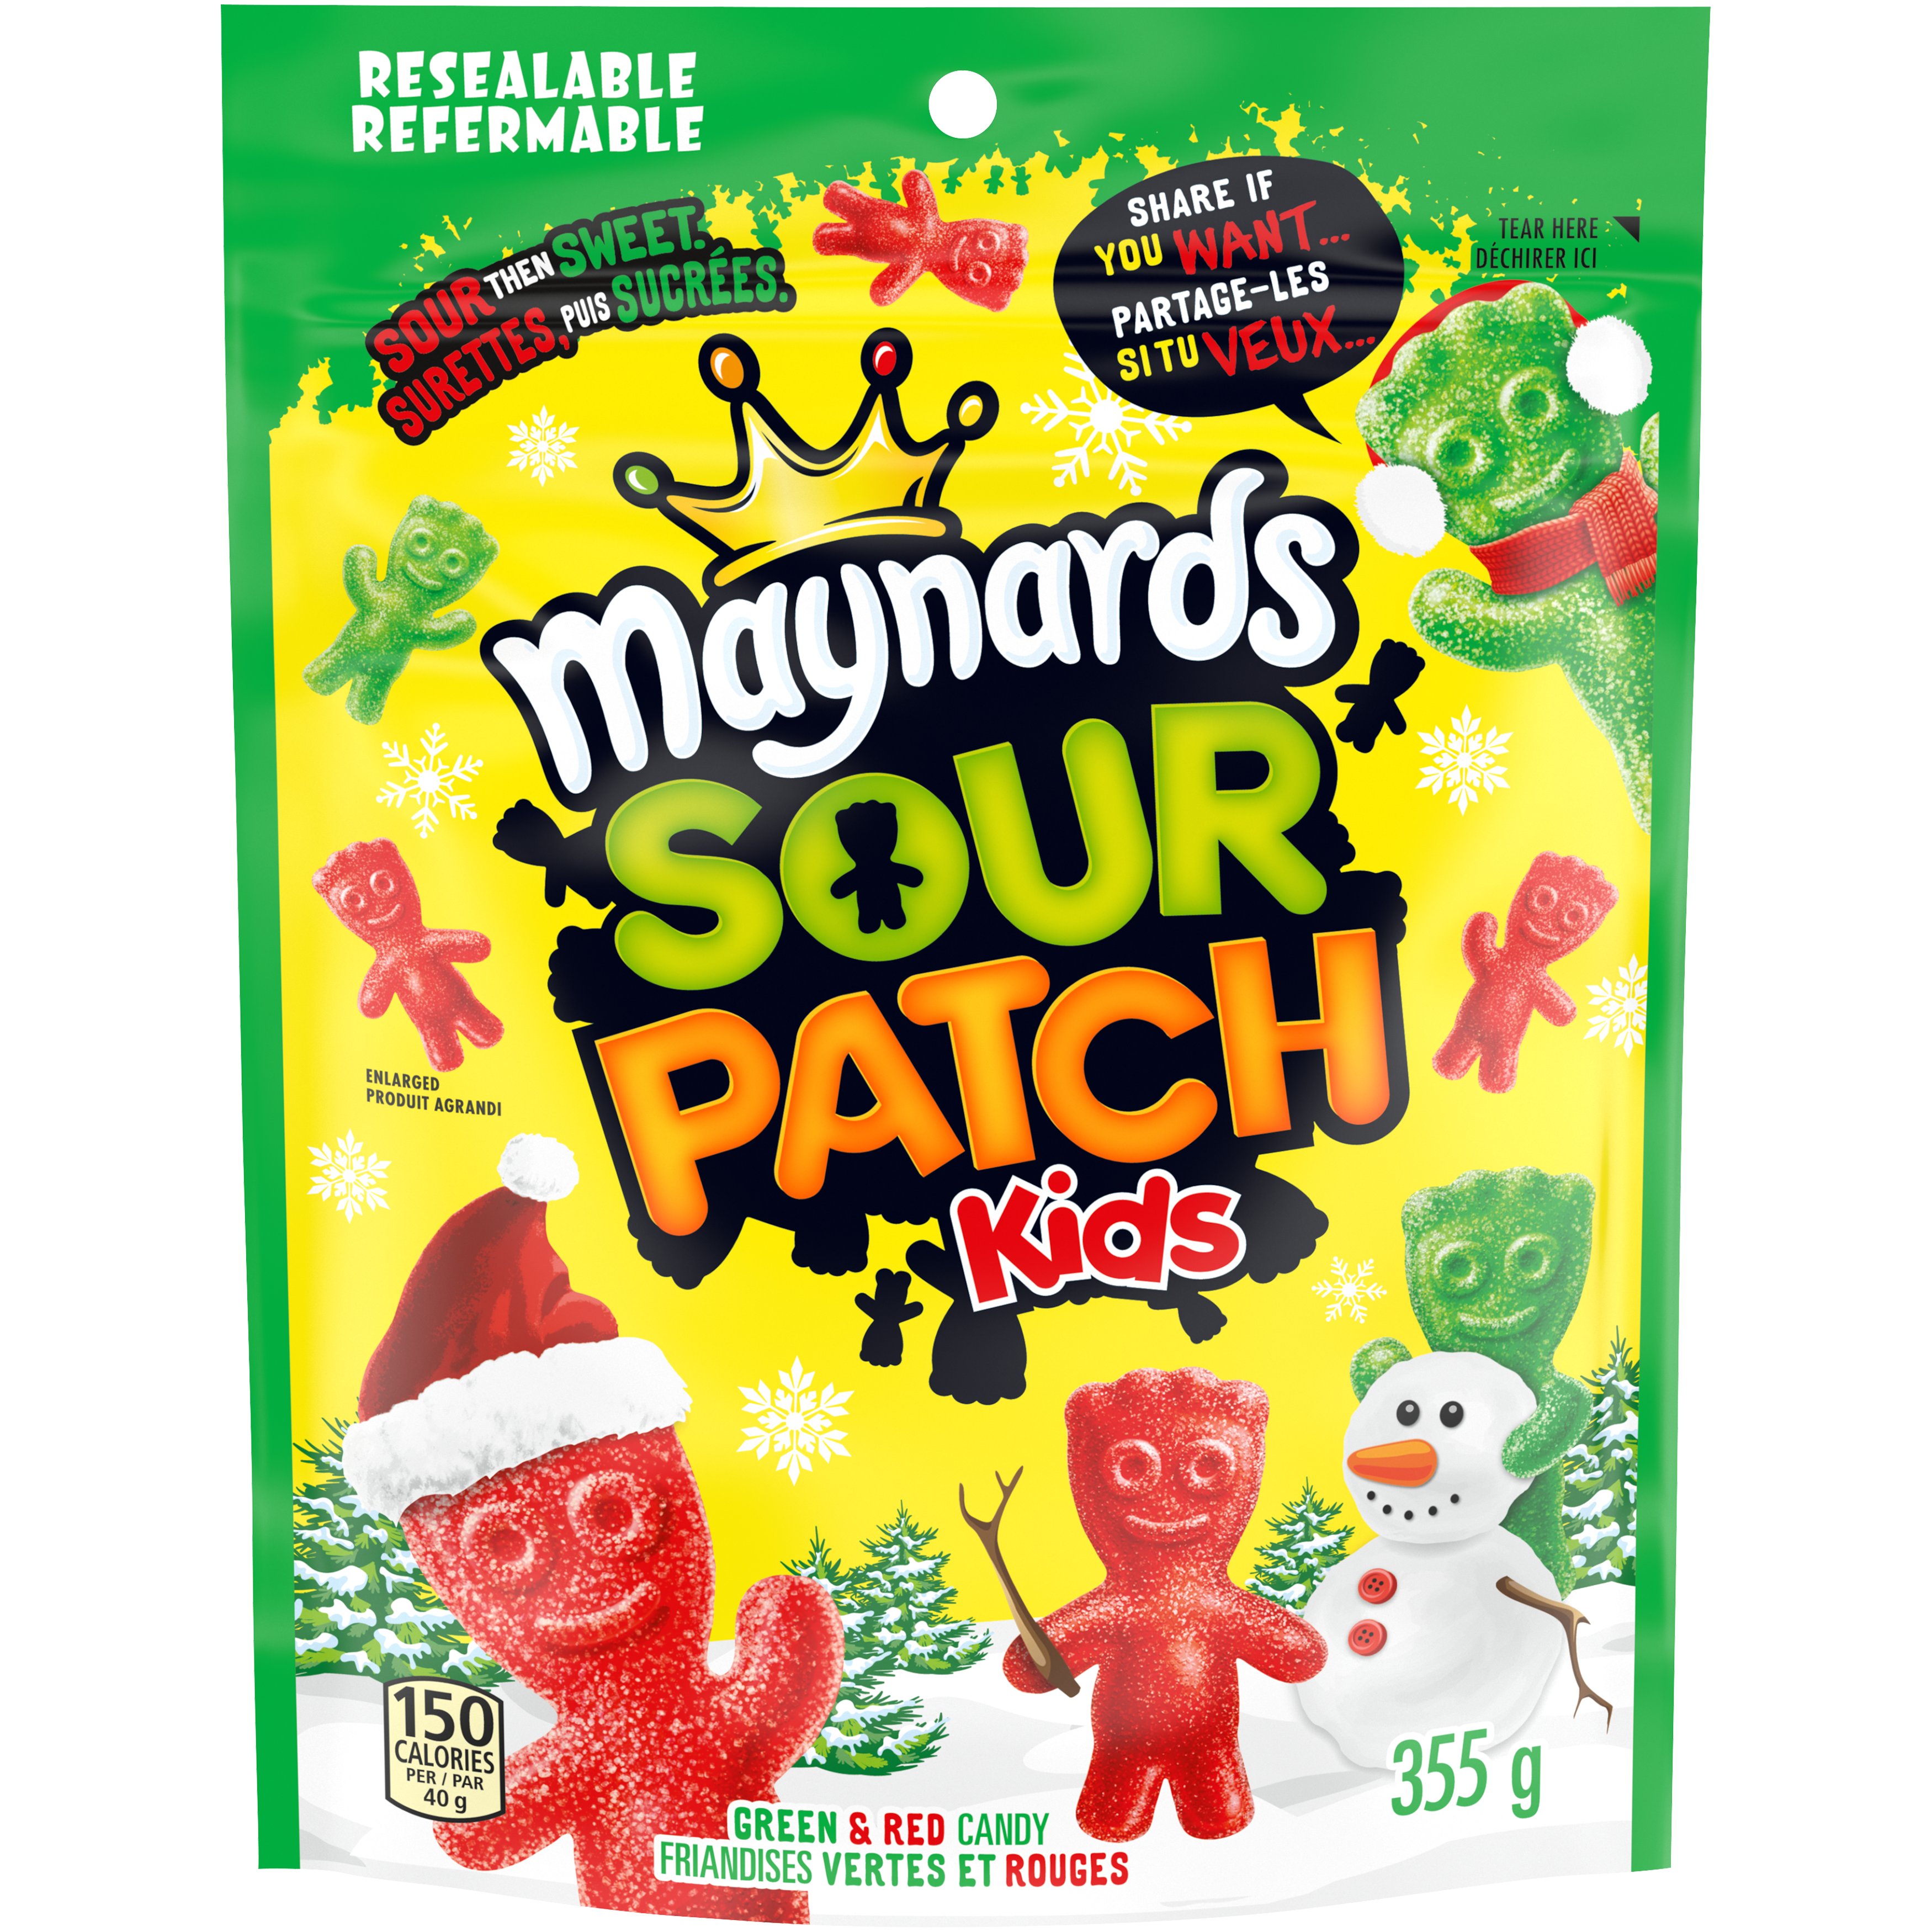 MAYNARDS Sour Patch Kids Red and Green Candy for Christmas (Resealable Bag, 355 g)-0